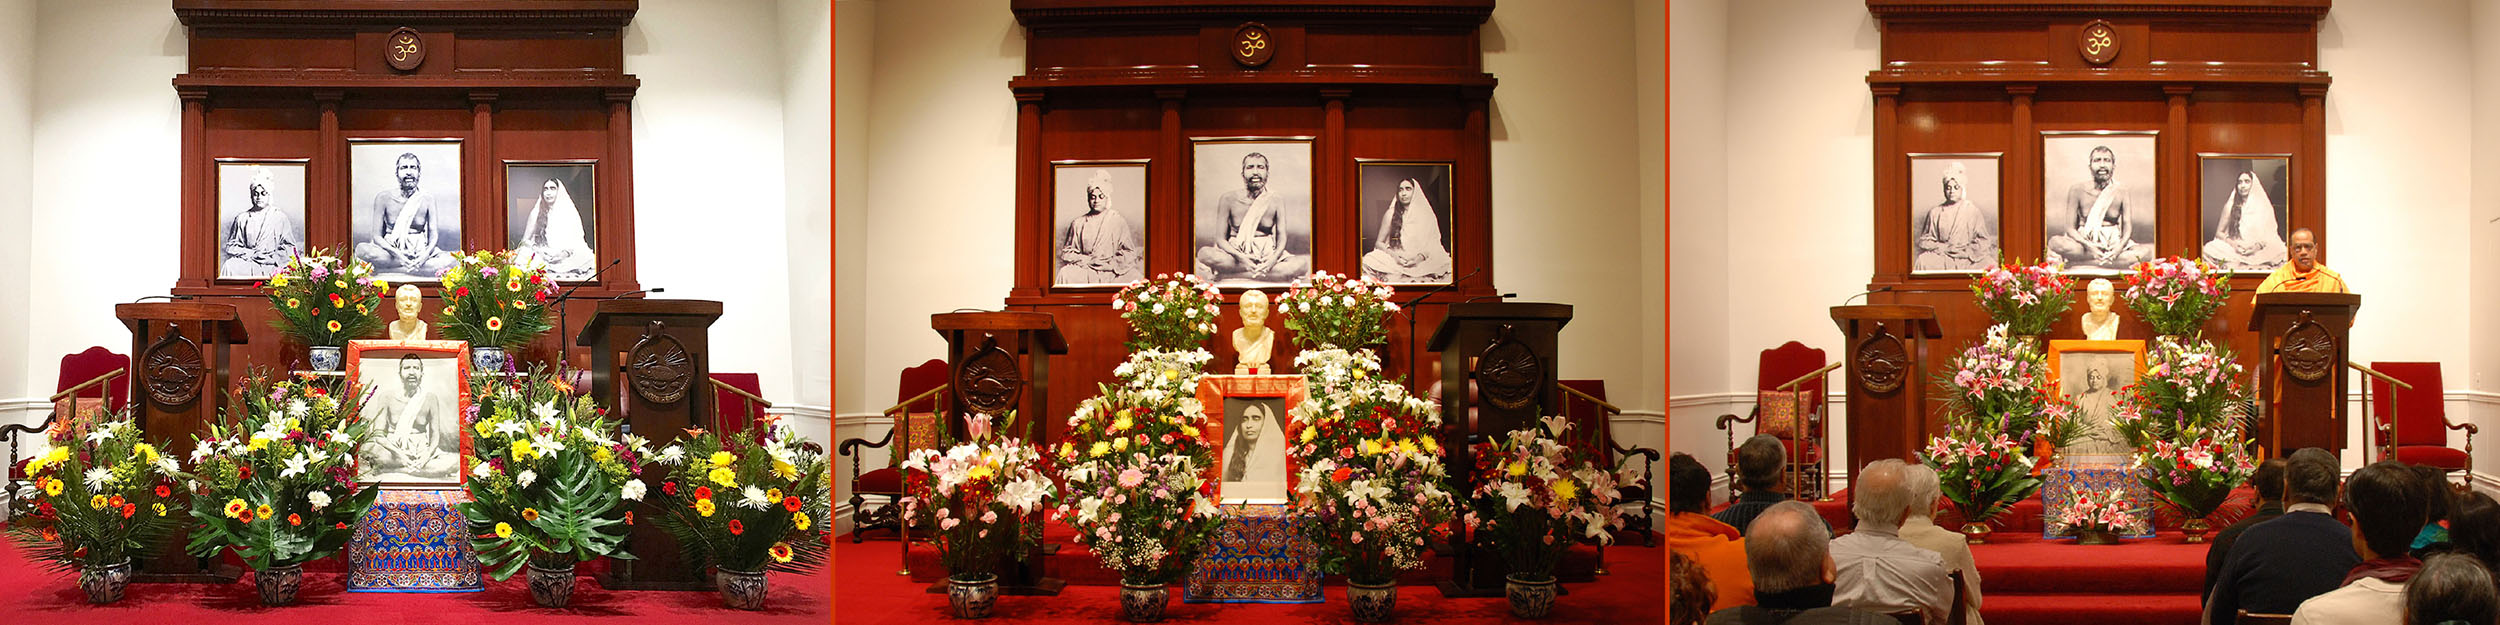 4 images of the altar at various ceremonies